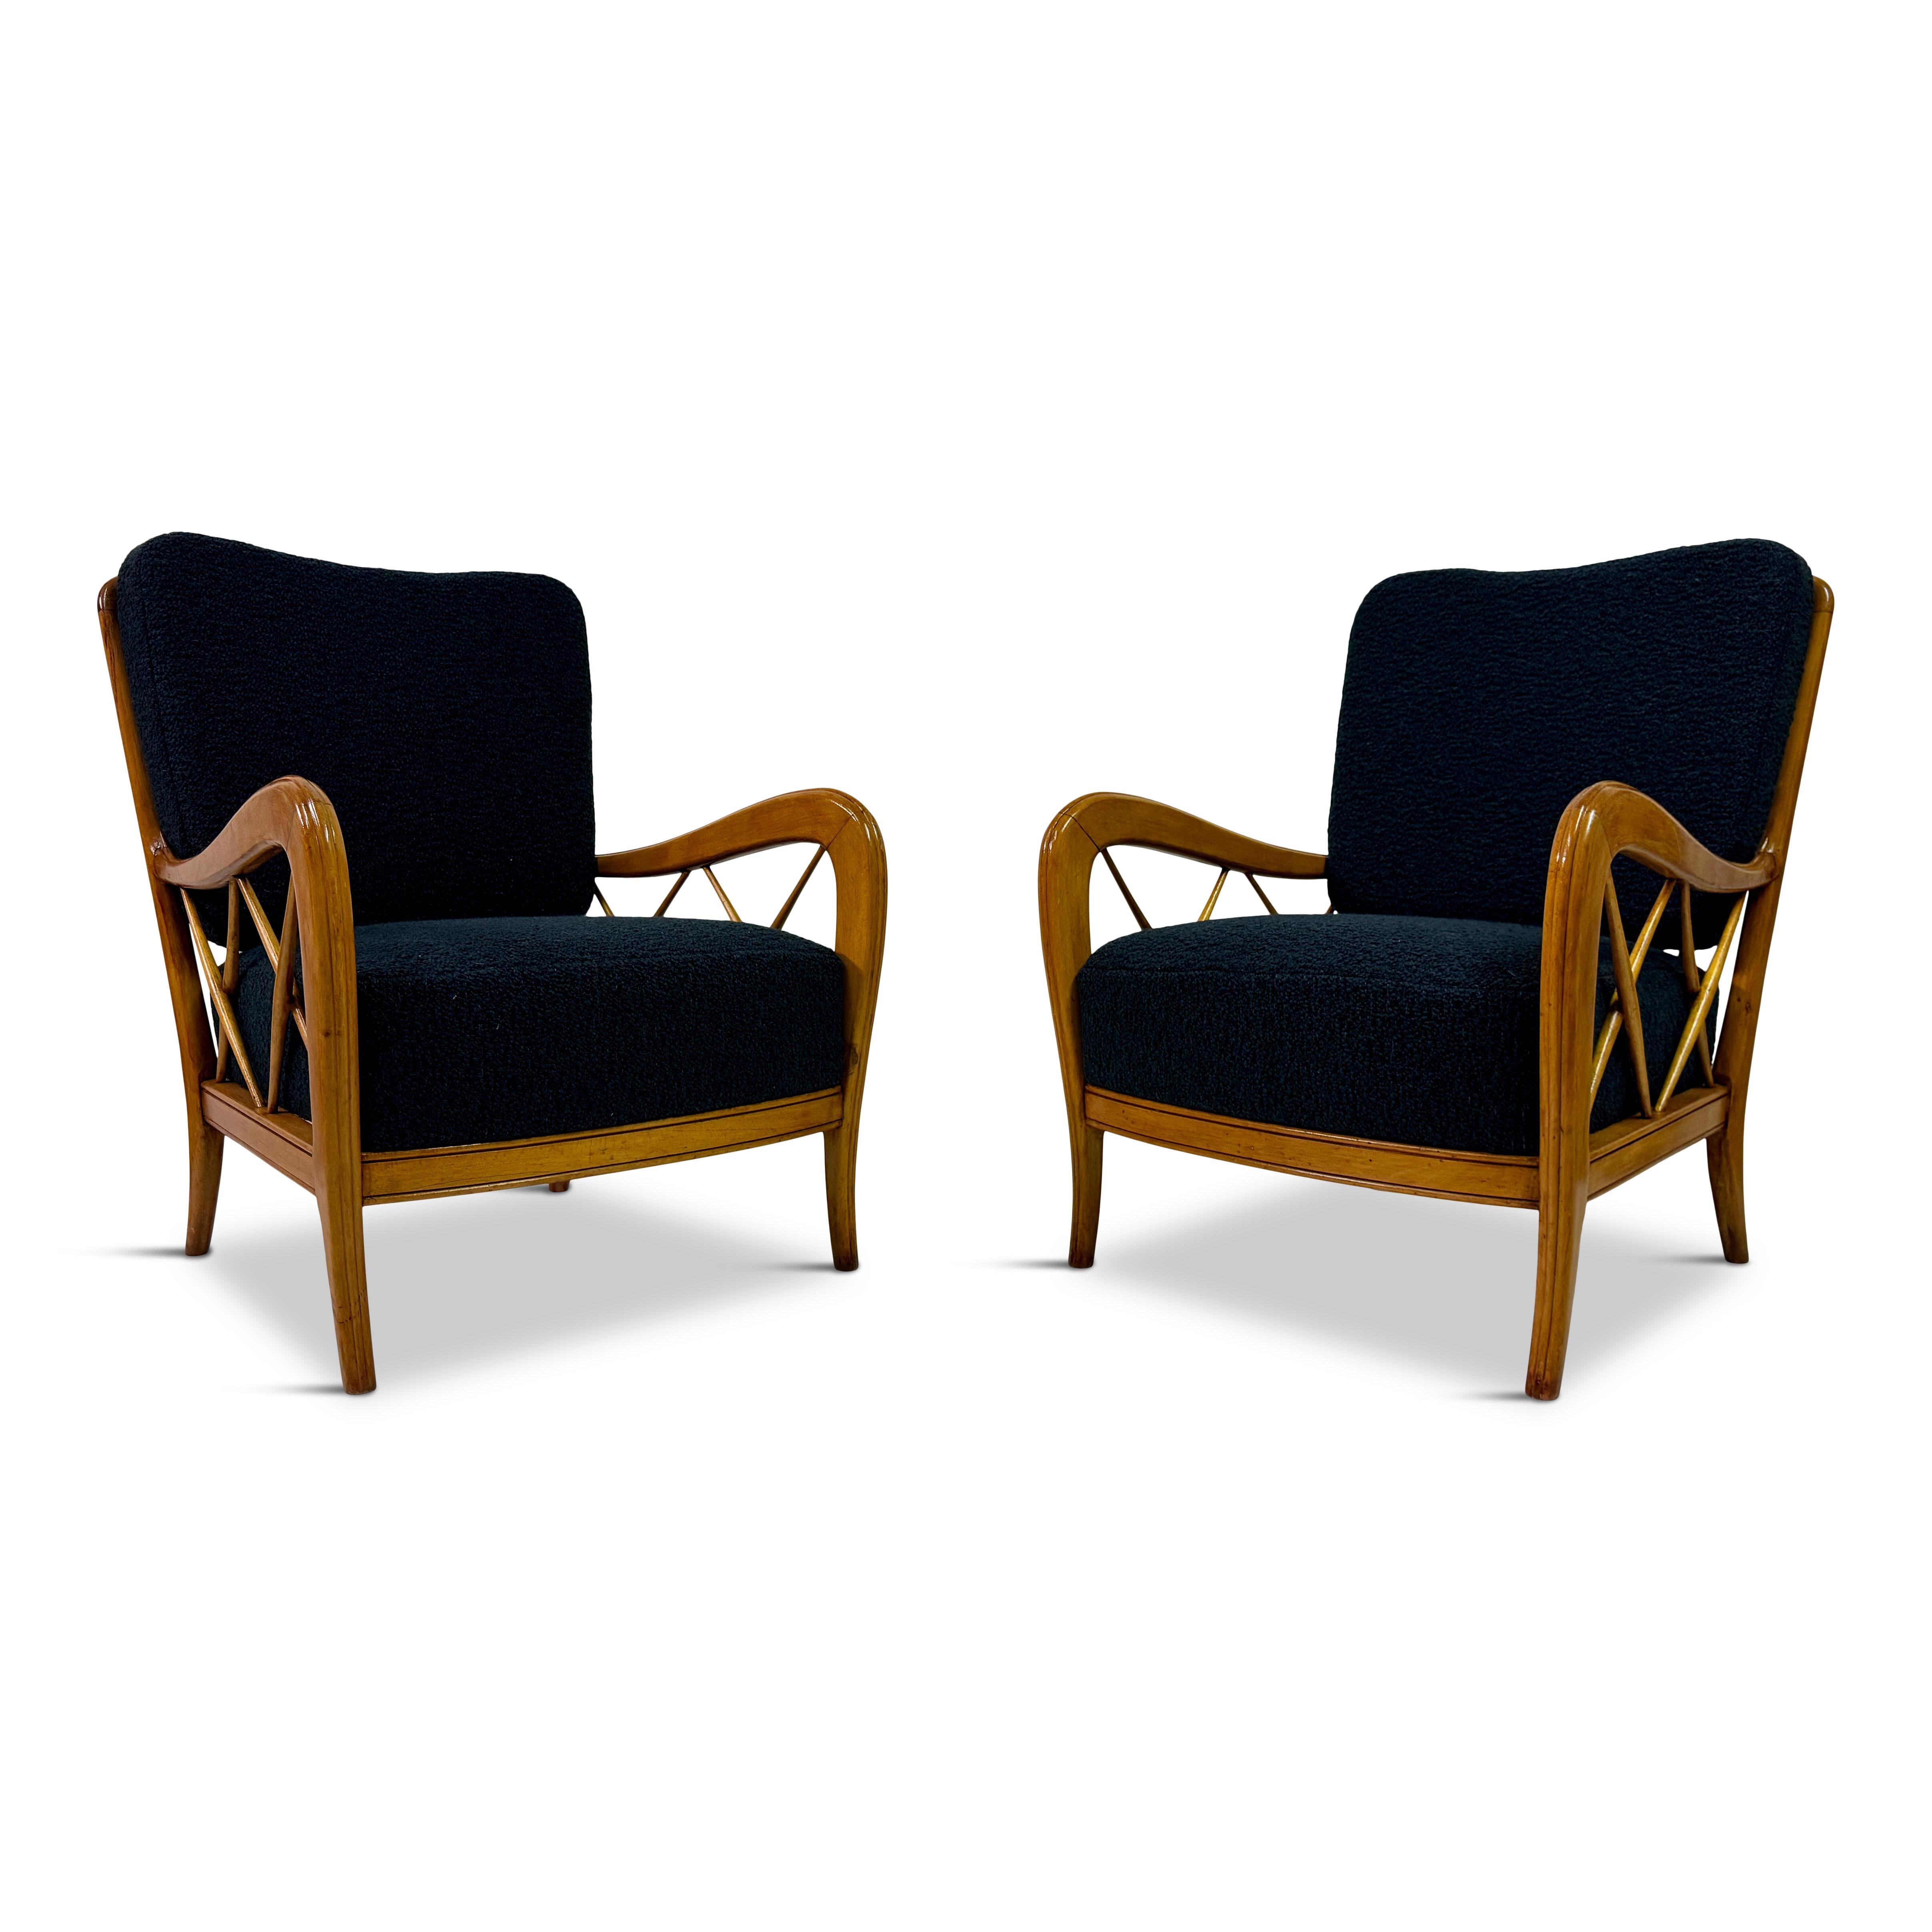 Pair of armchairs

In the style of Paolo Buffa

New boucle upholstery

Italy 1950s